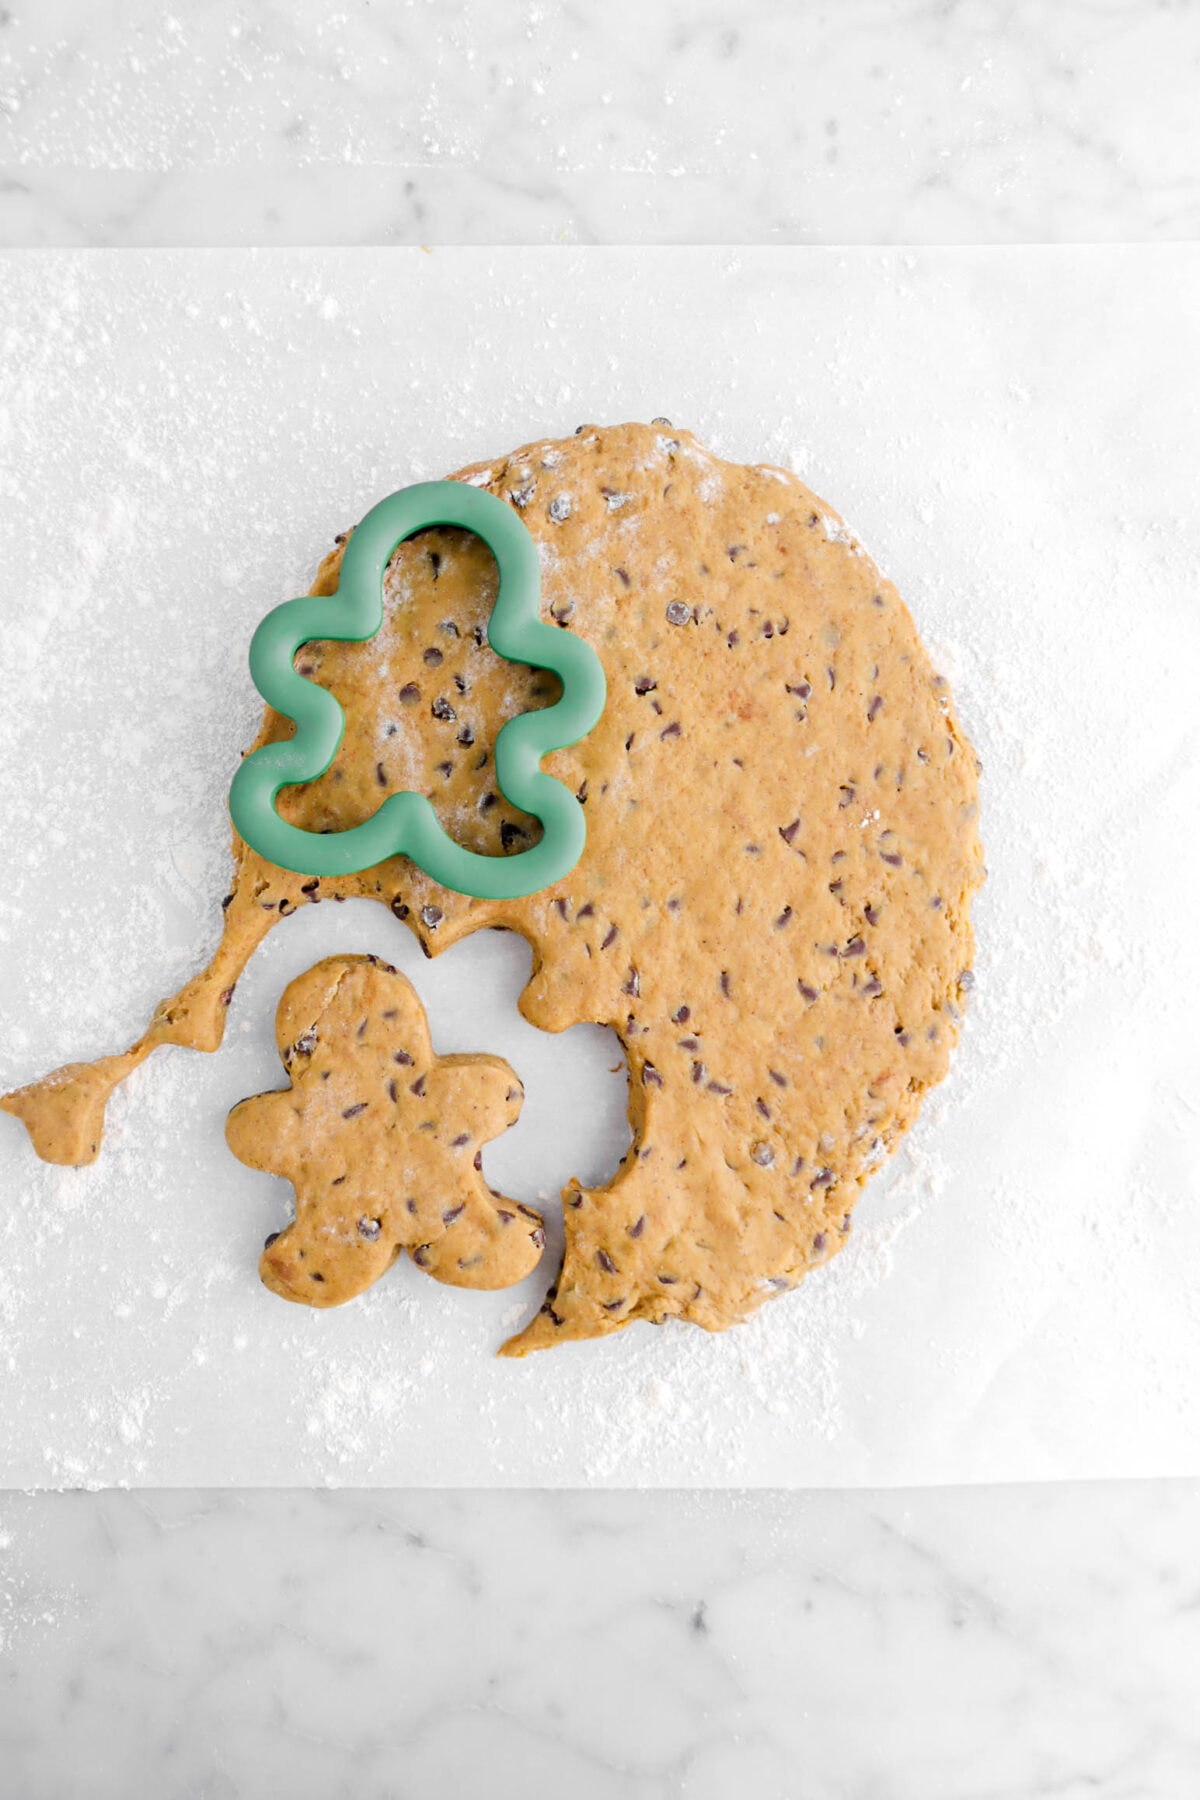 scone dough being cut into gingerbread shapes with green cookie cutter.